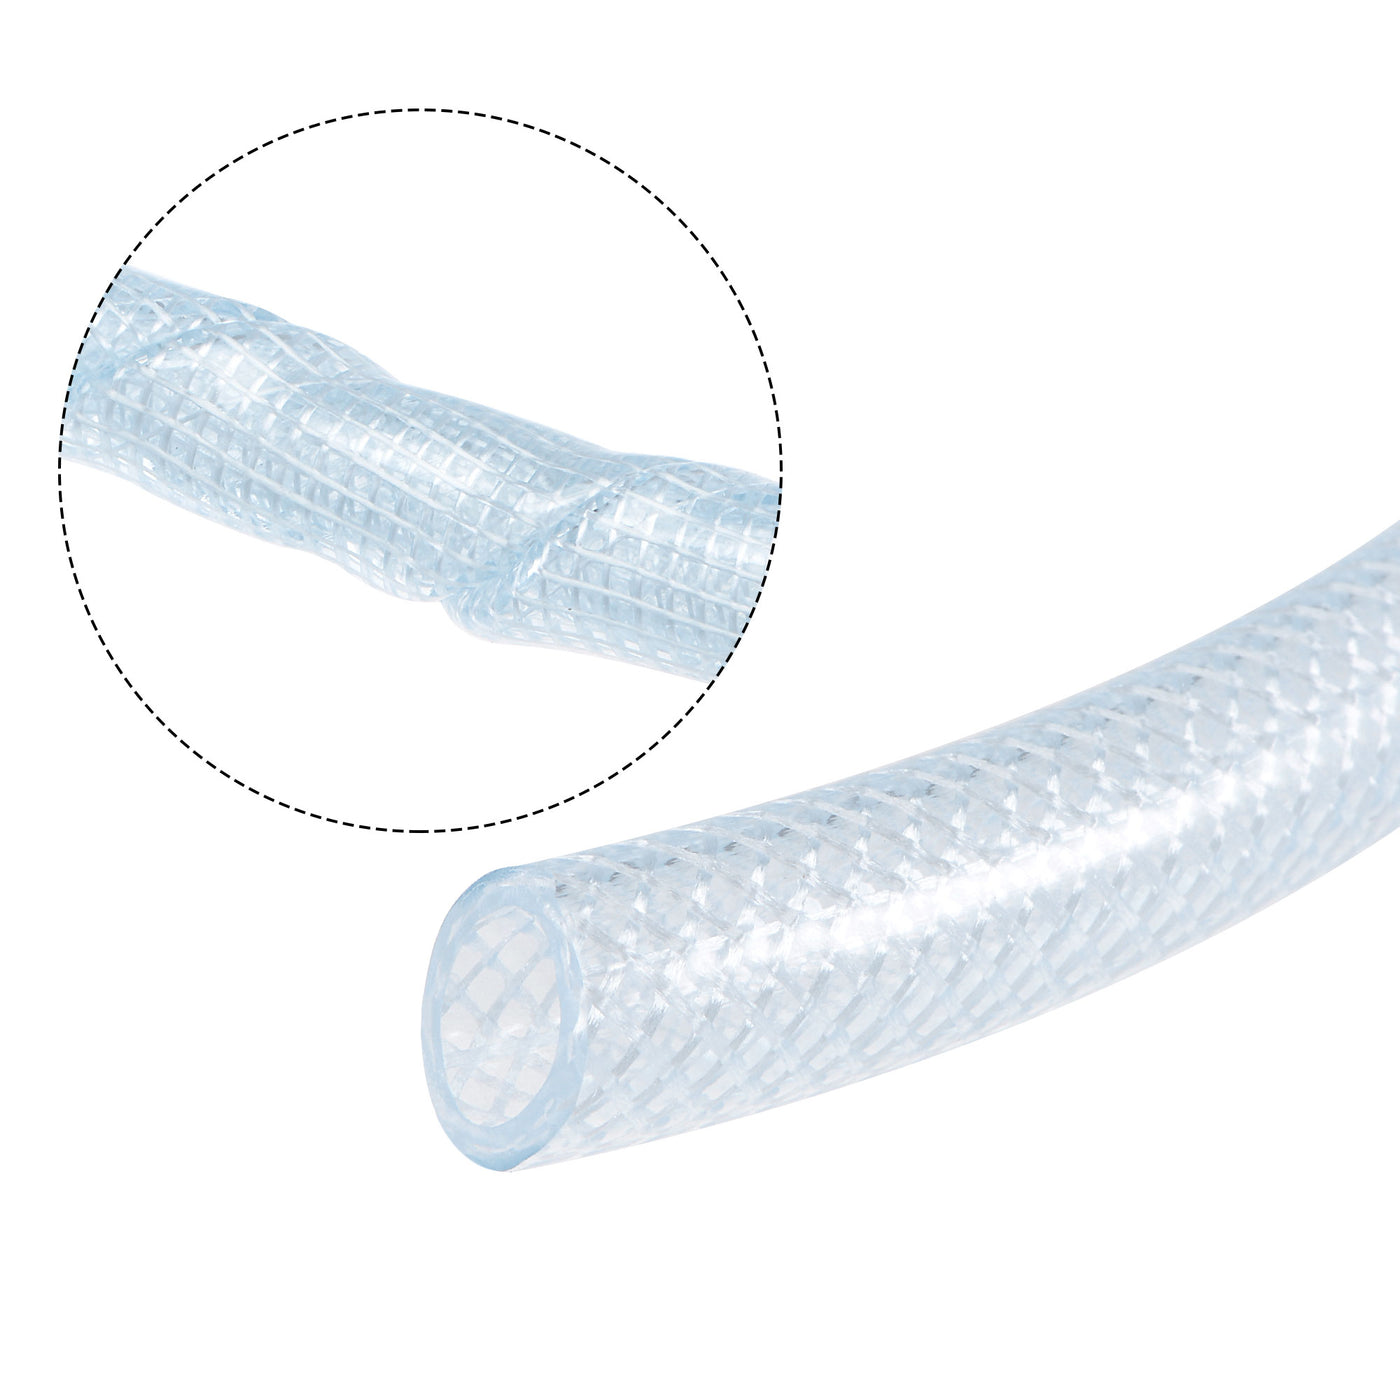 Uxcell Uxcell Braided PVC Tubing, 1/2"(13mm) ID 11/16"(17mm) OD 10ft Flexible Clear Water Hose